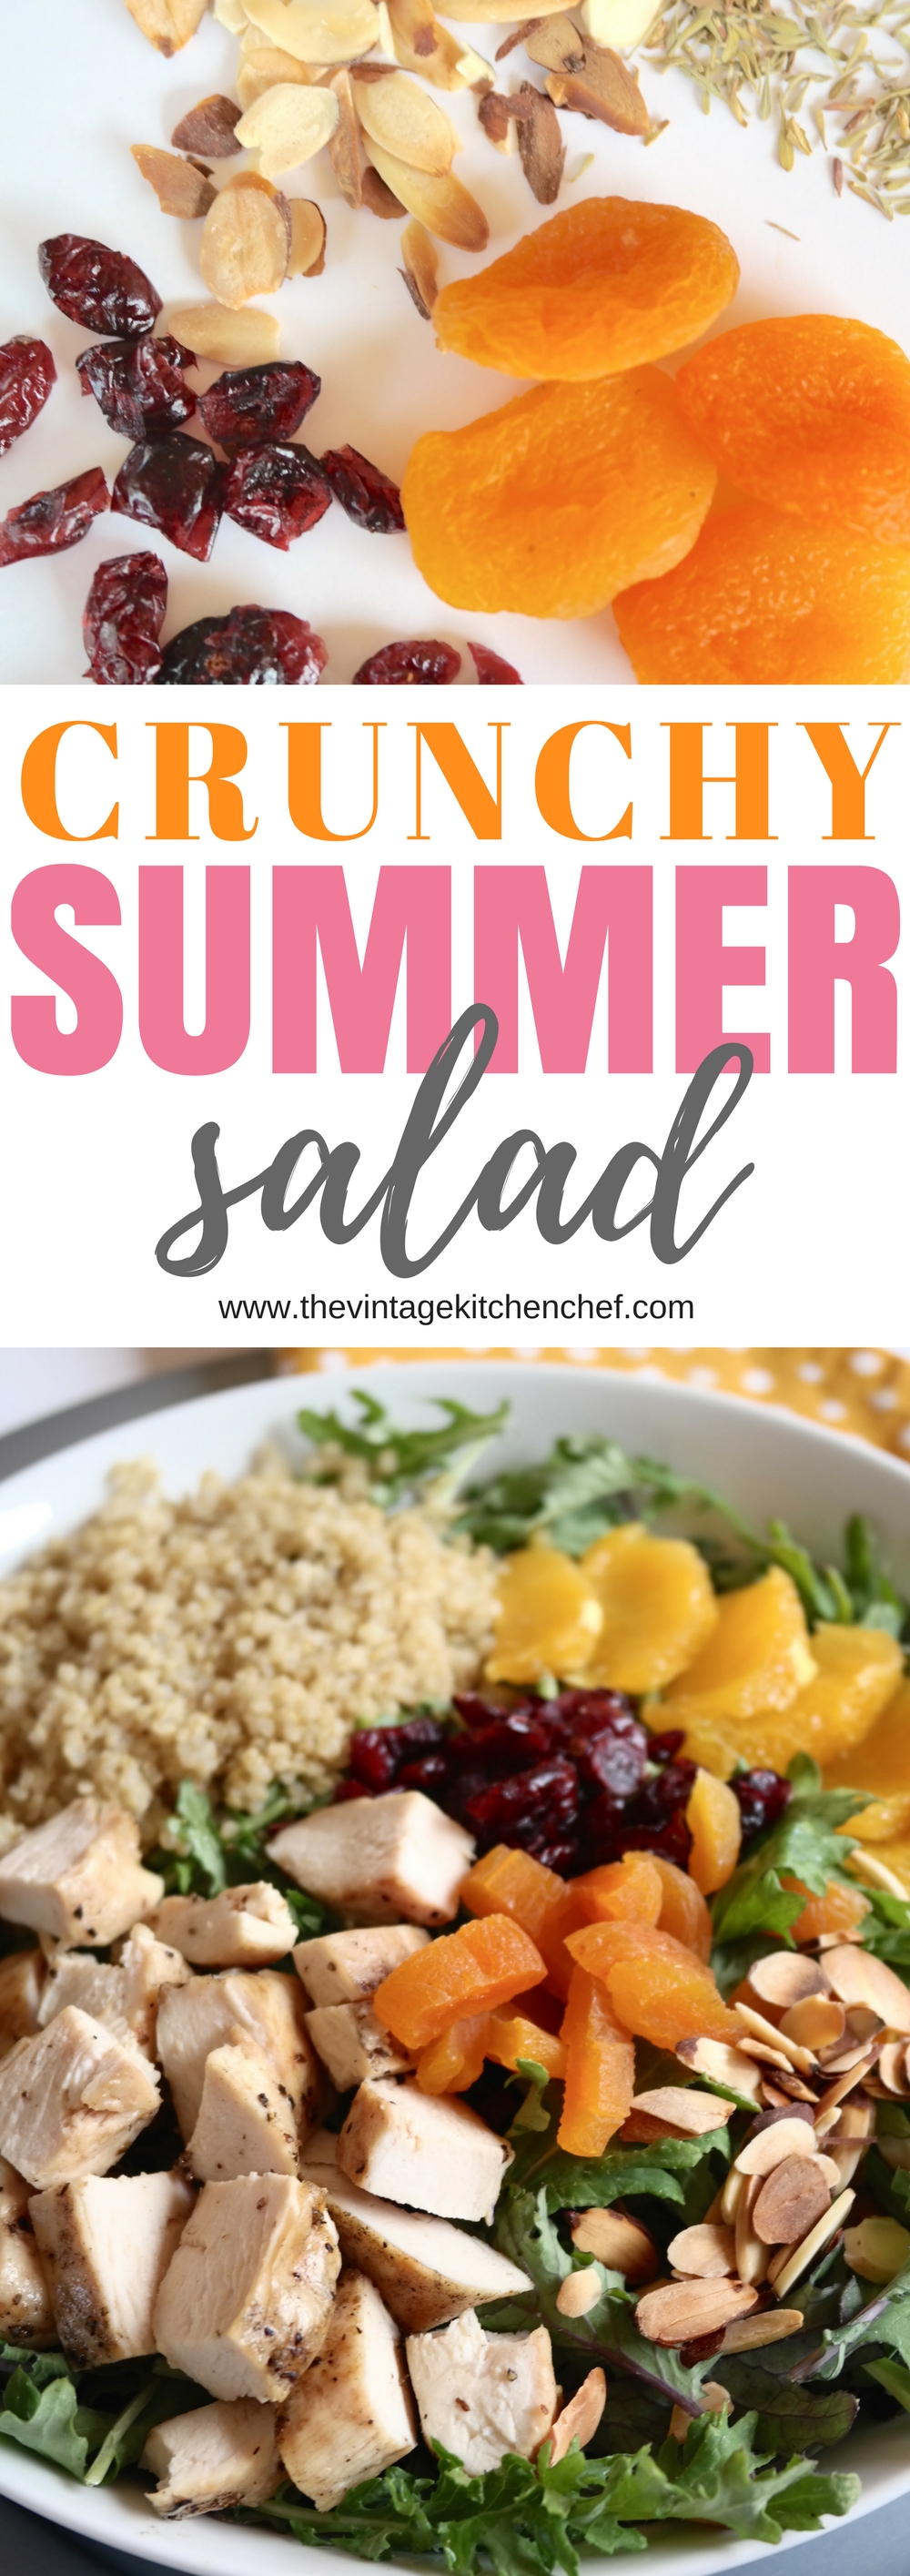 Enjoy plenty of flavors, color, and texture in this delicious and healthy crunchy summer salad. A real treat for the taste buds!